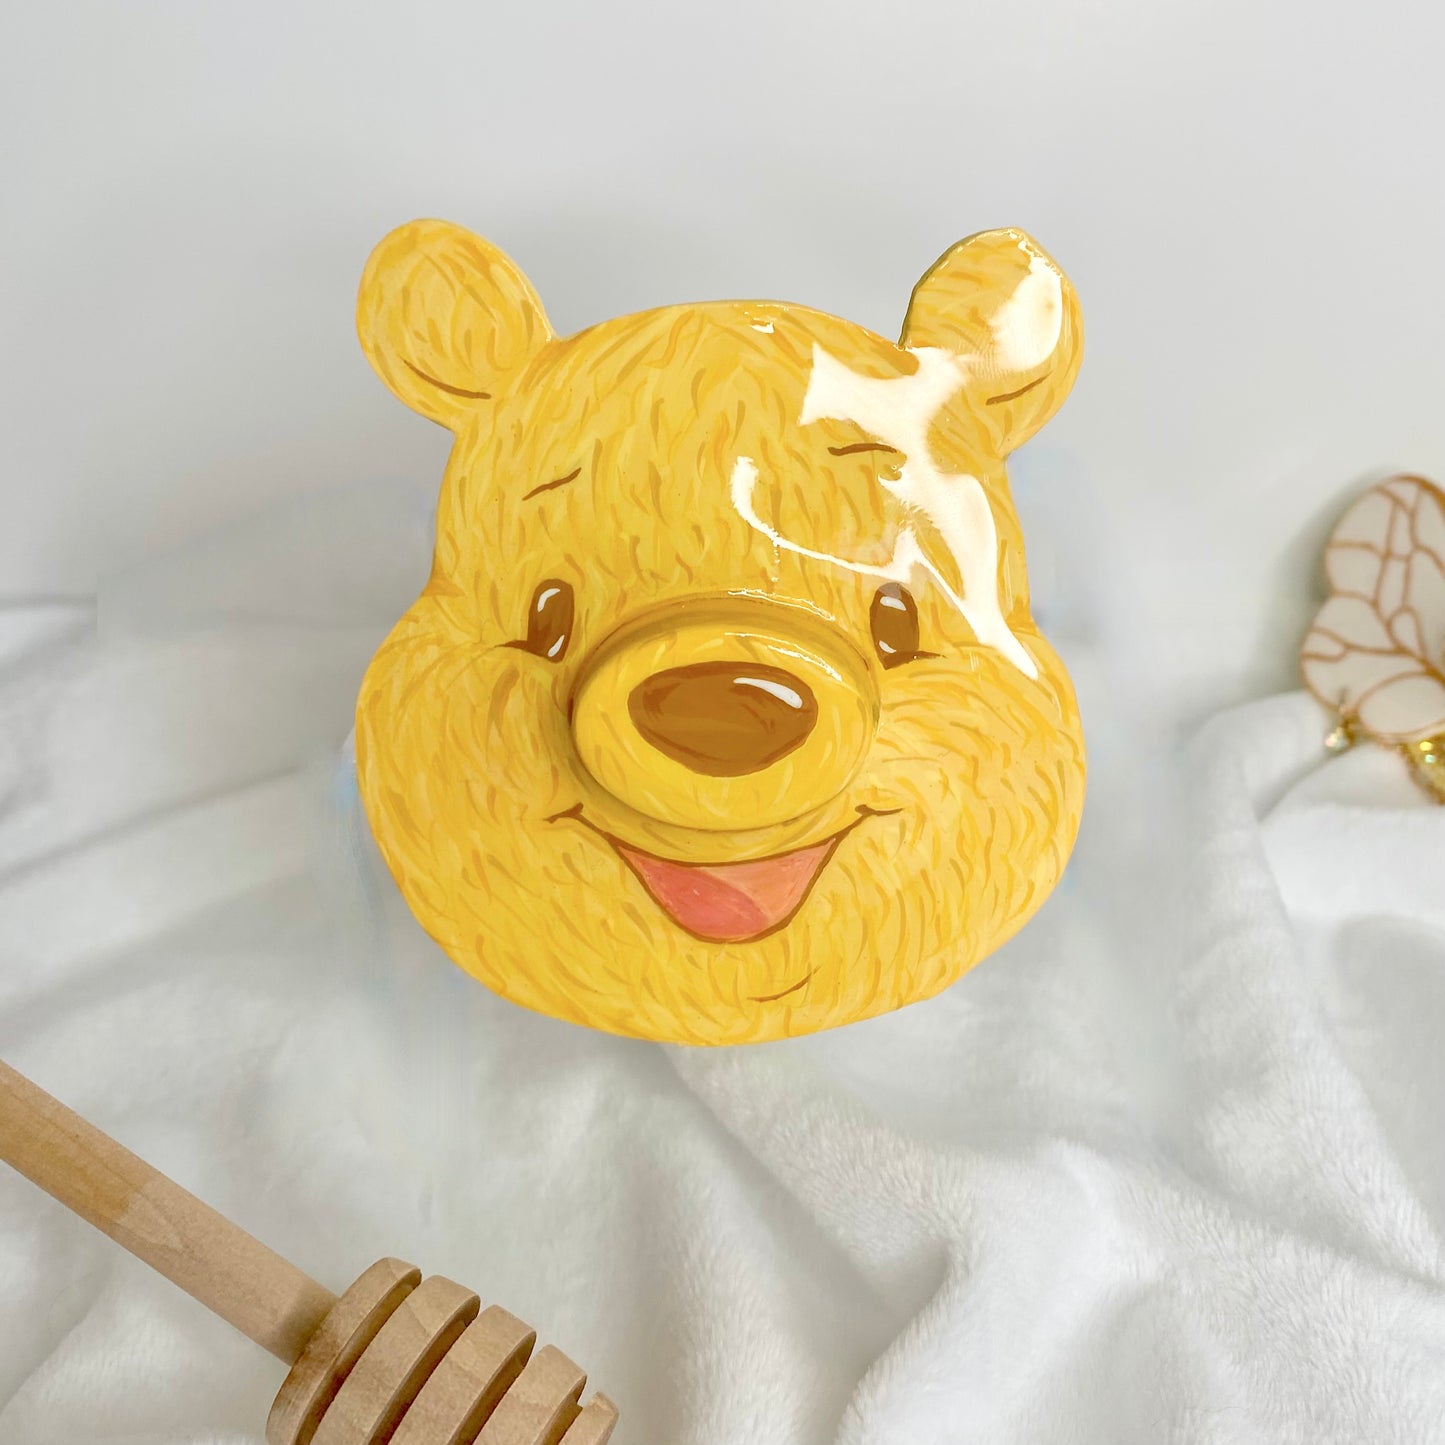 Winnie the pooh - Shaped adult pacifiers